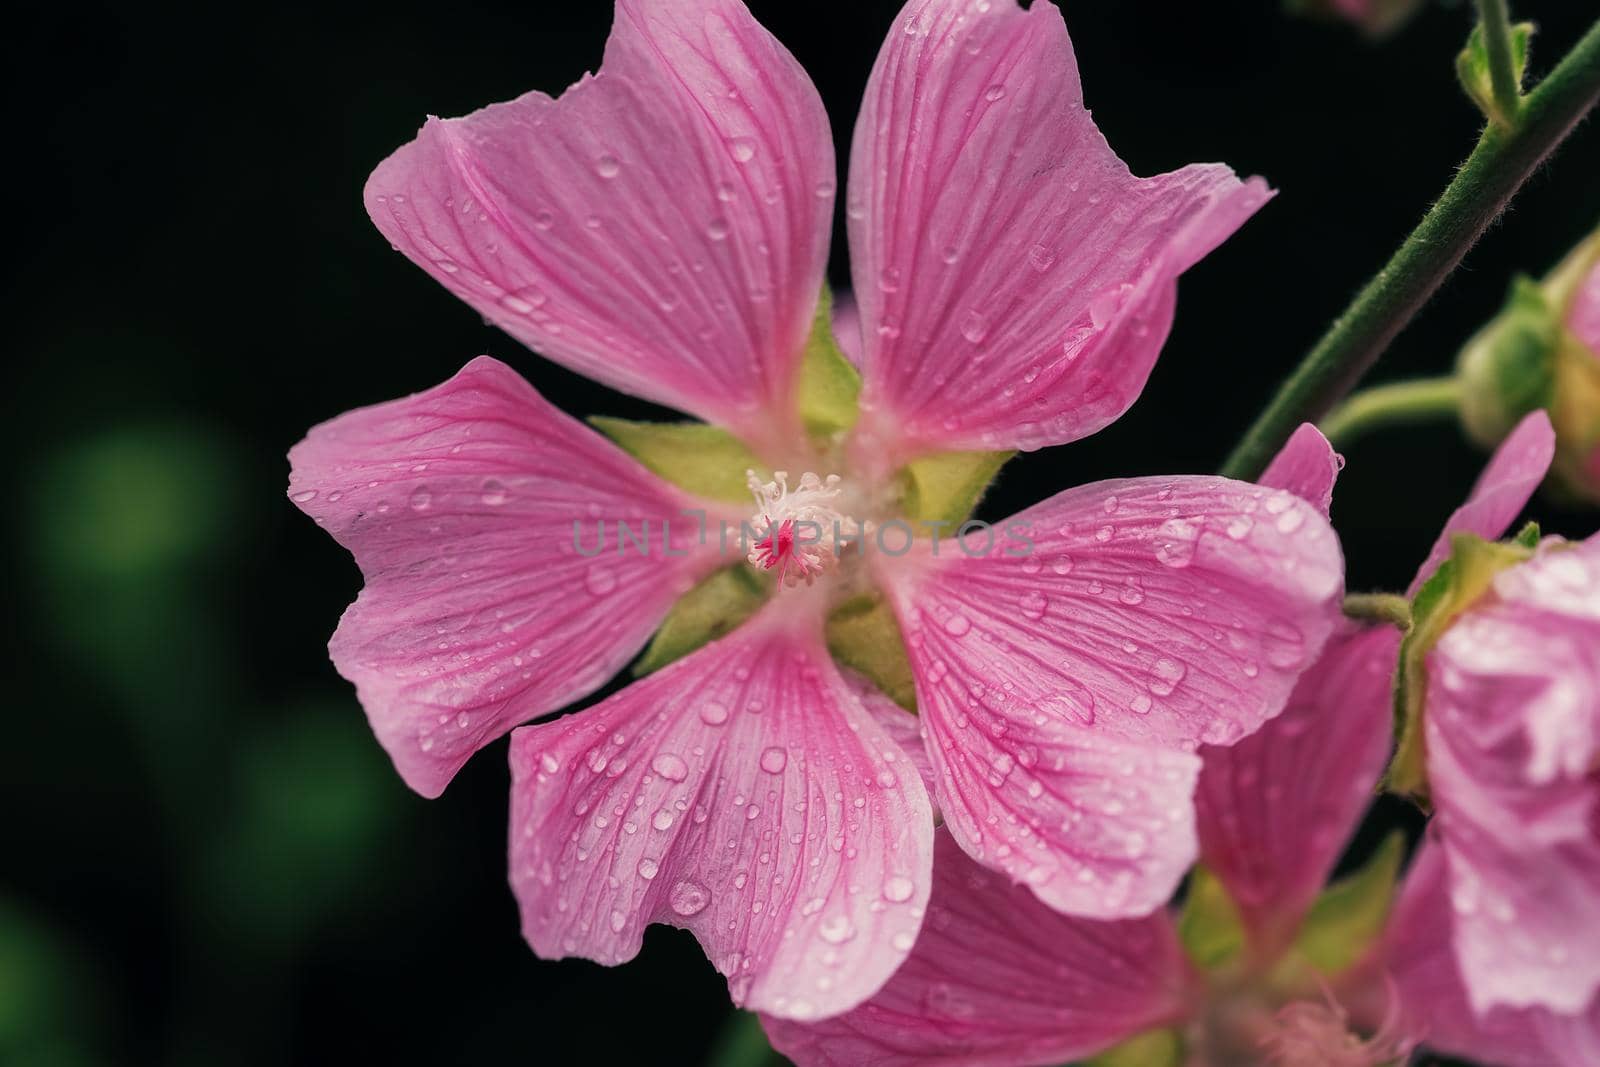 Beautiful pink fresh flowers and buds with drops after rain close up by galinasharapova